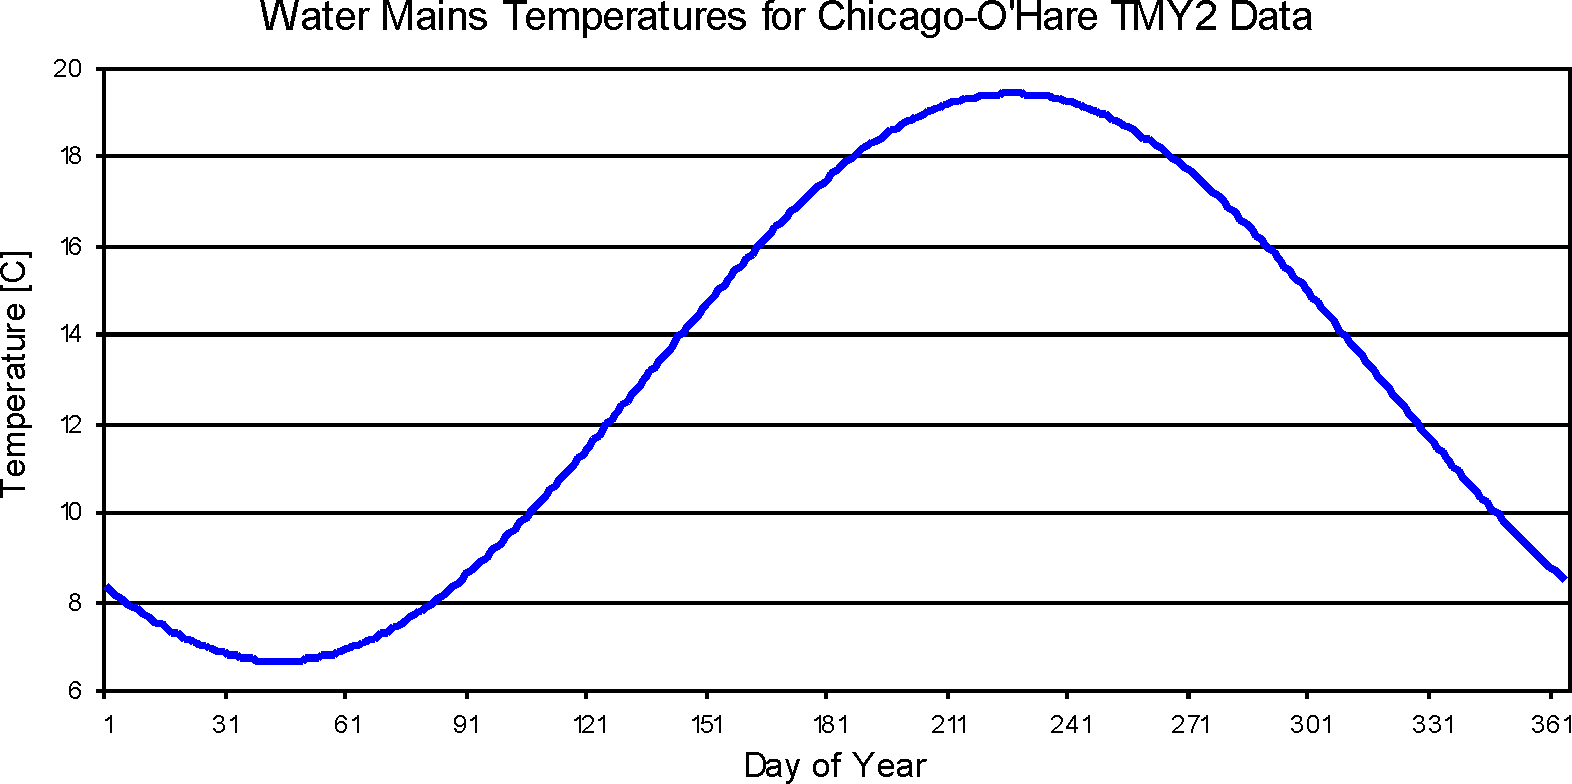 Water Mains Temperatures for Chicago-O’Hare TMY2 Data